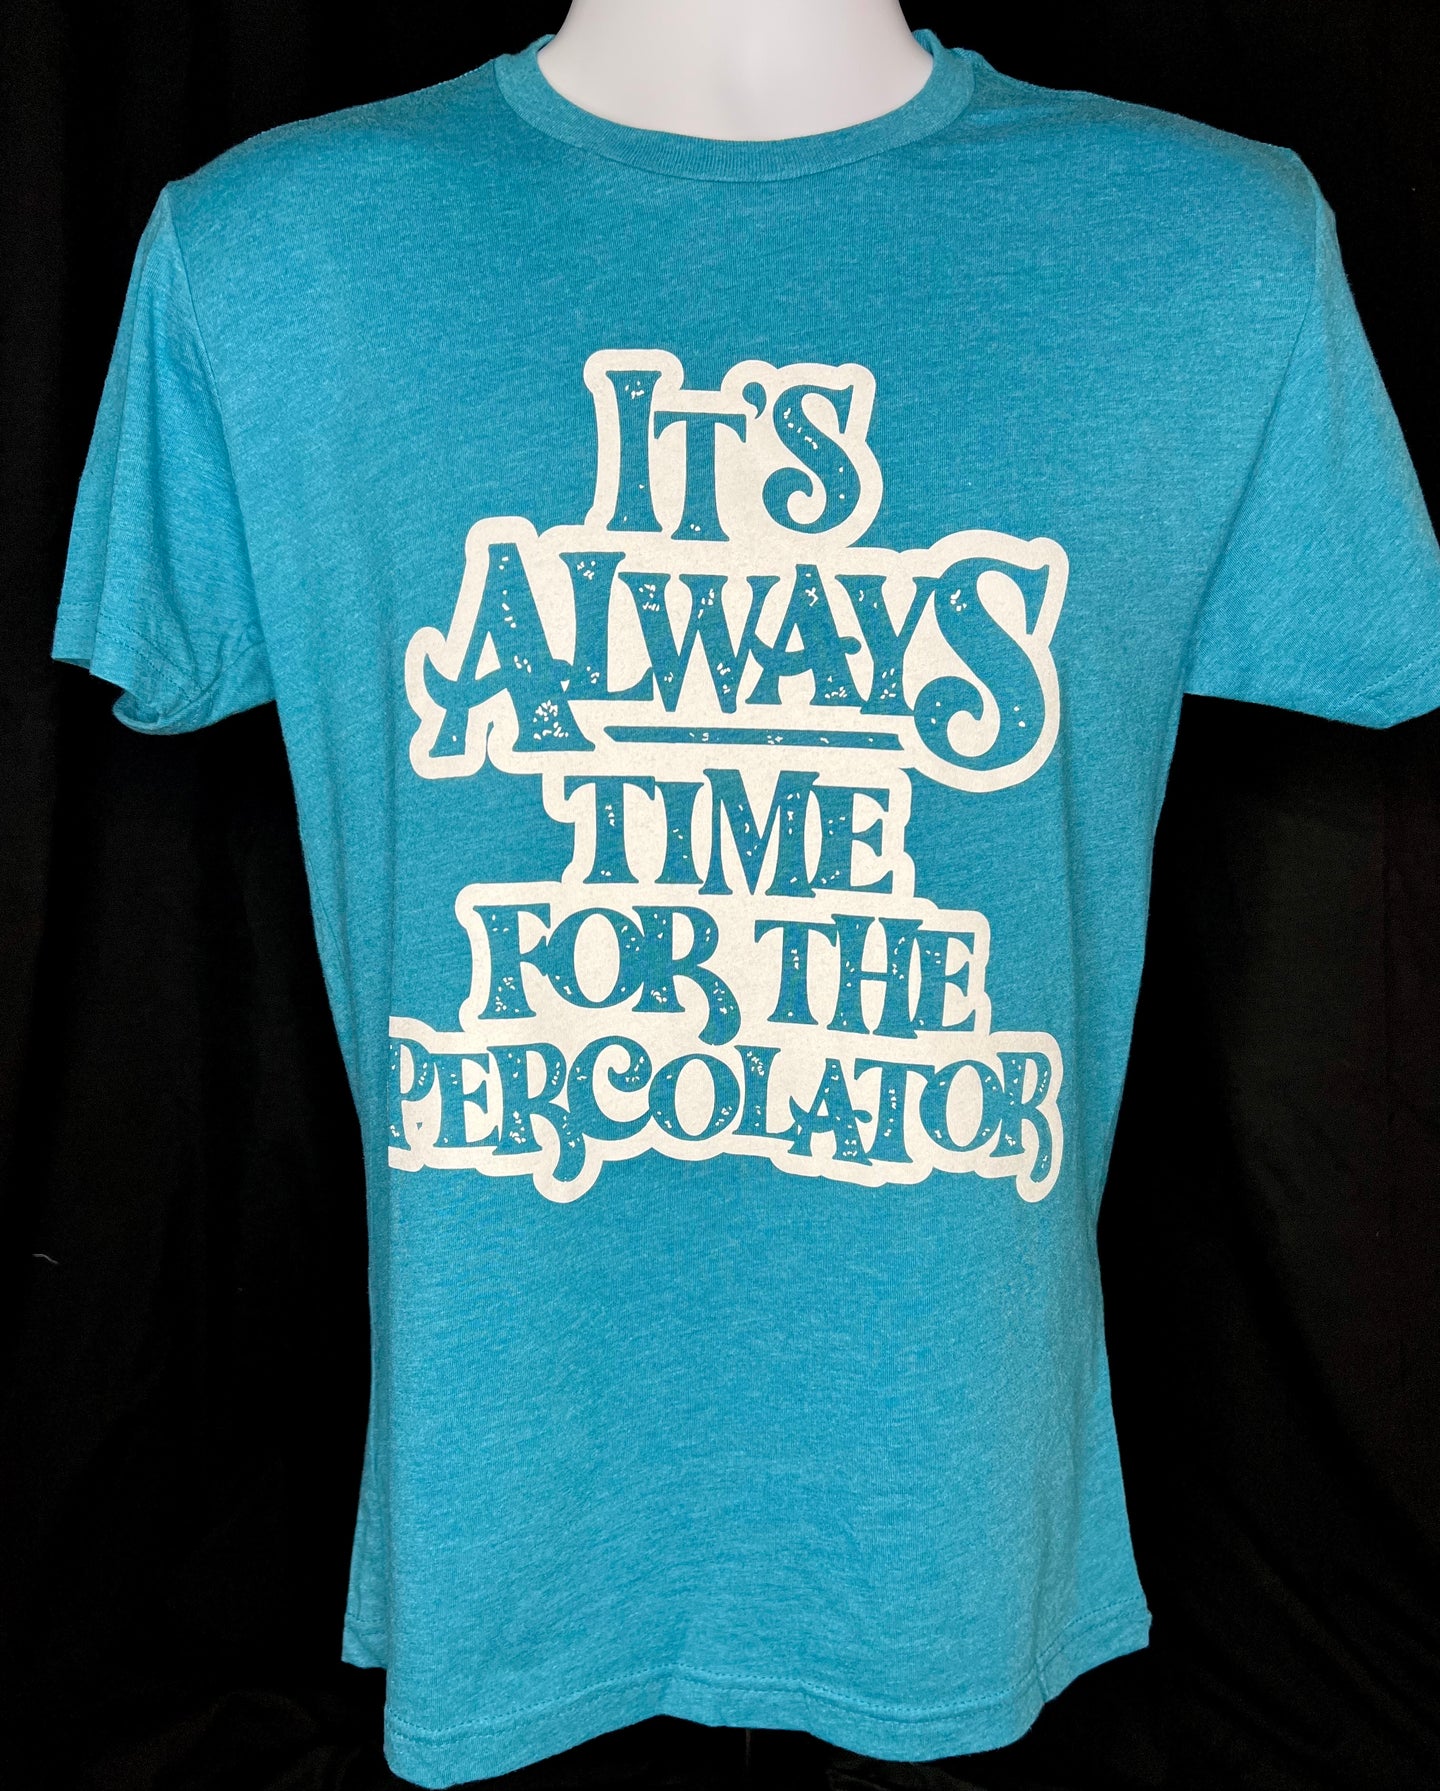 It's ALWAYS Time For The Percolator™ - Teal T-Shirt (Unisex)